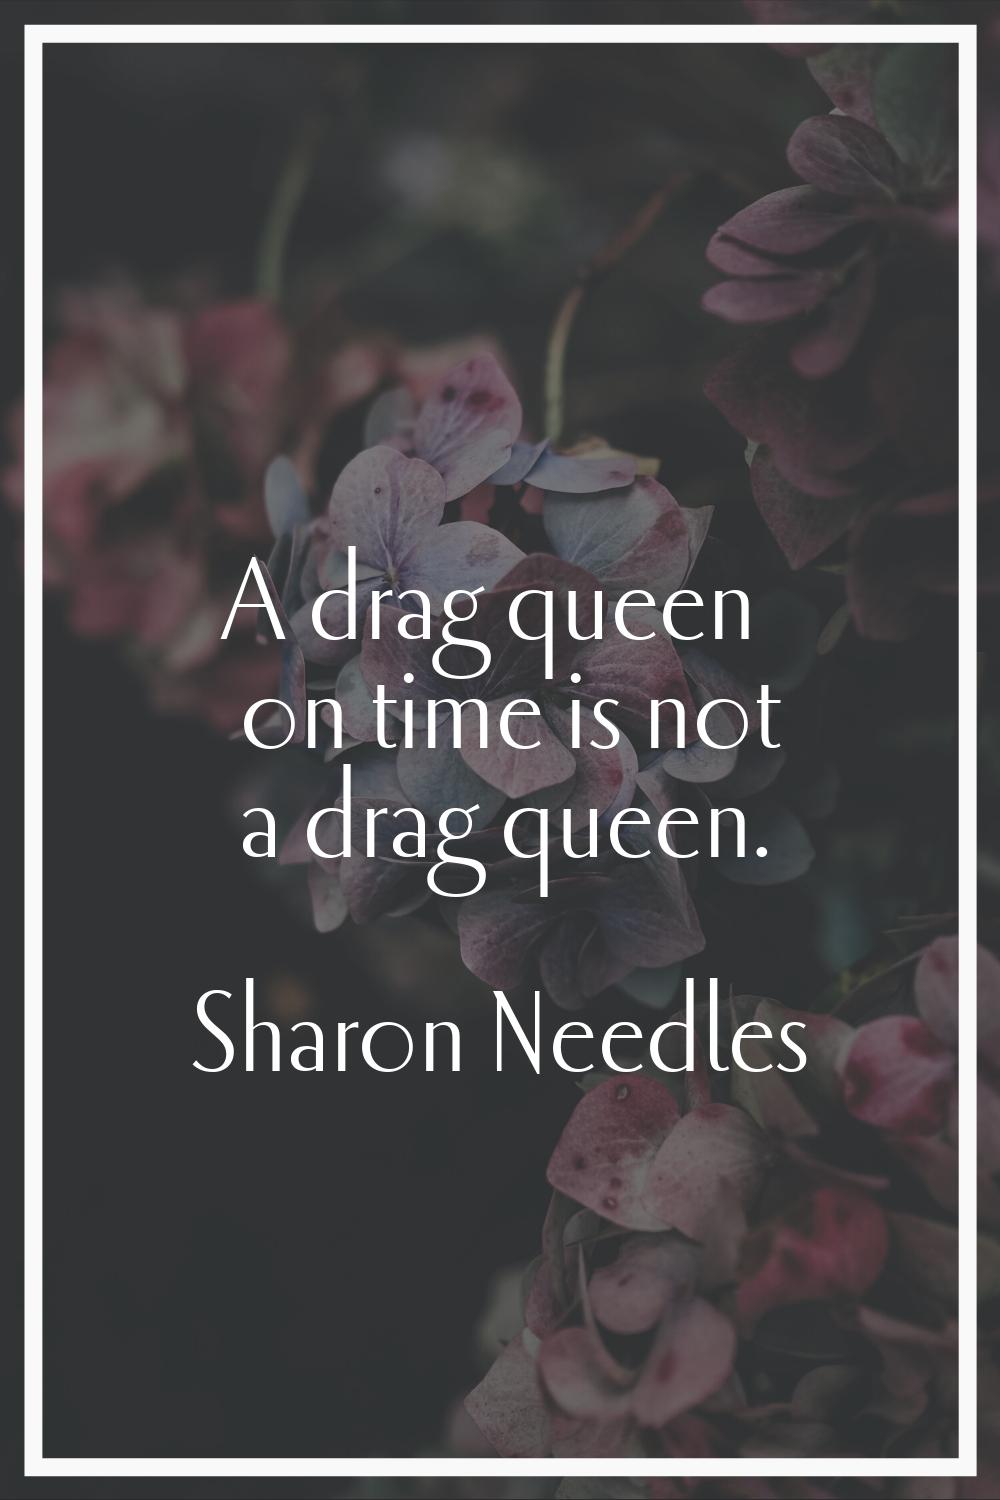 A drag queen on time is not a drag queen.